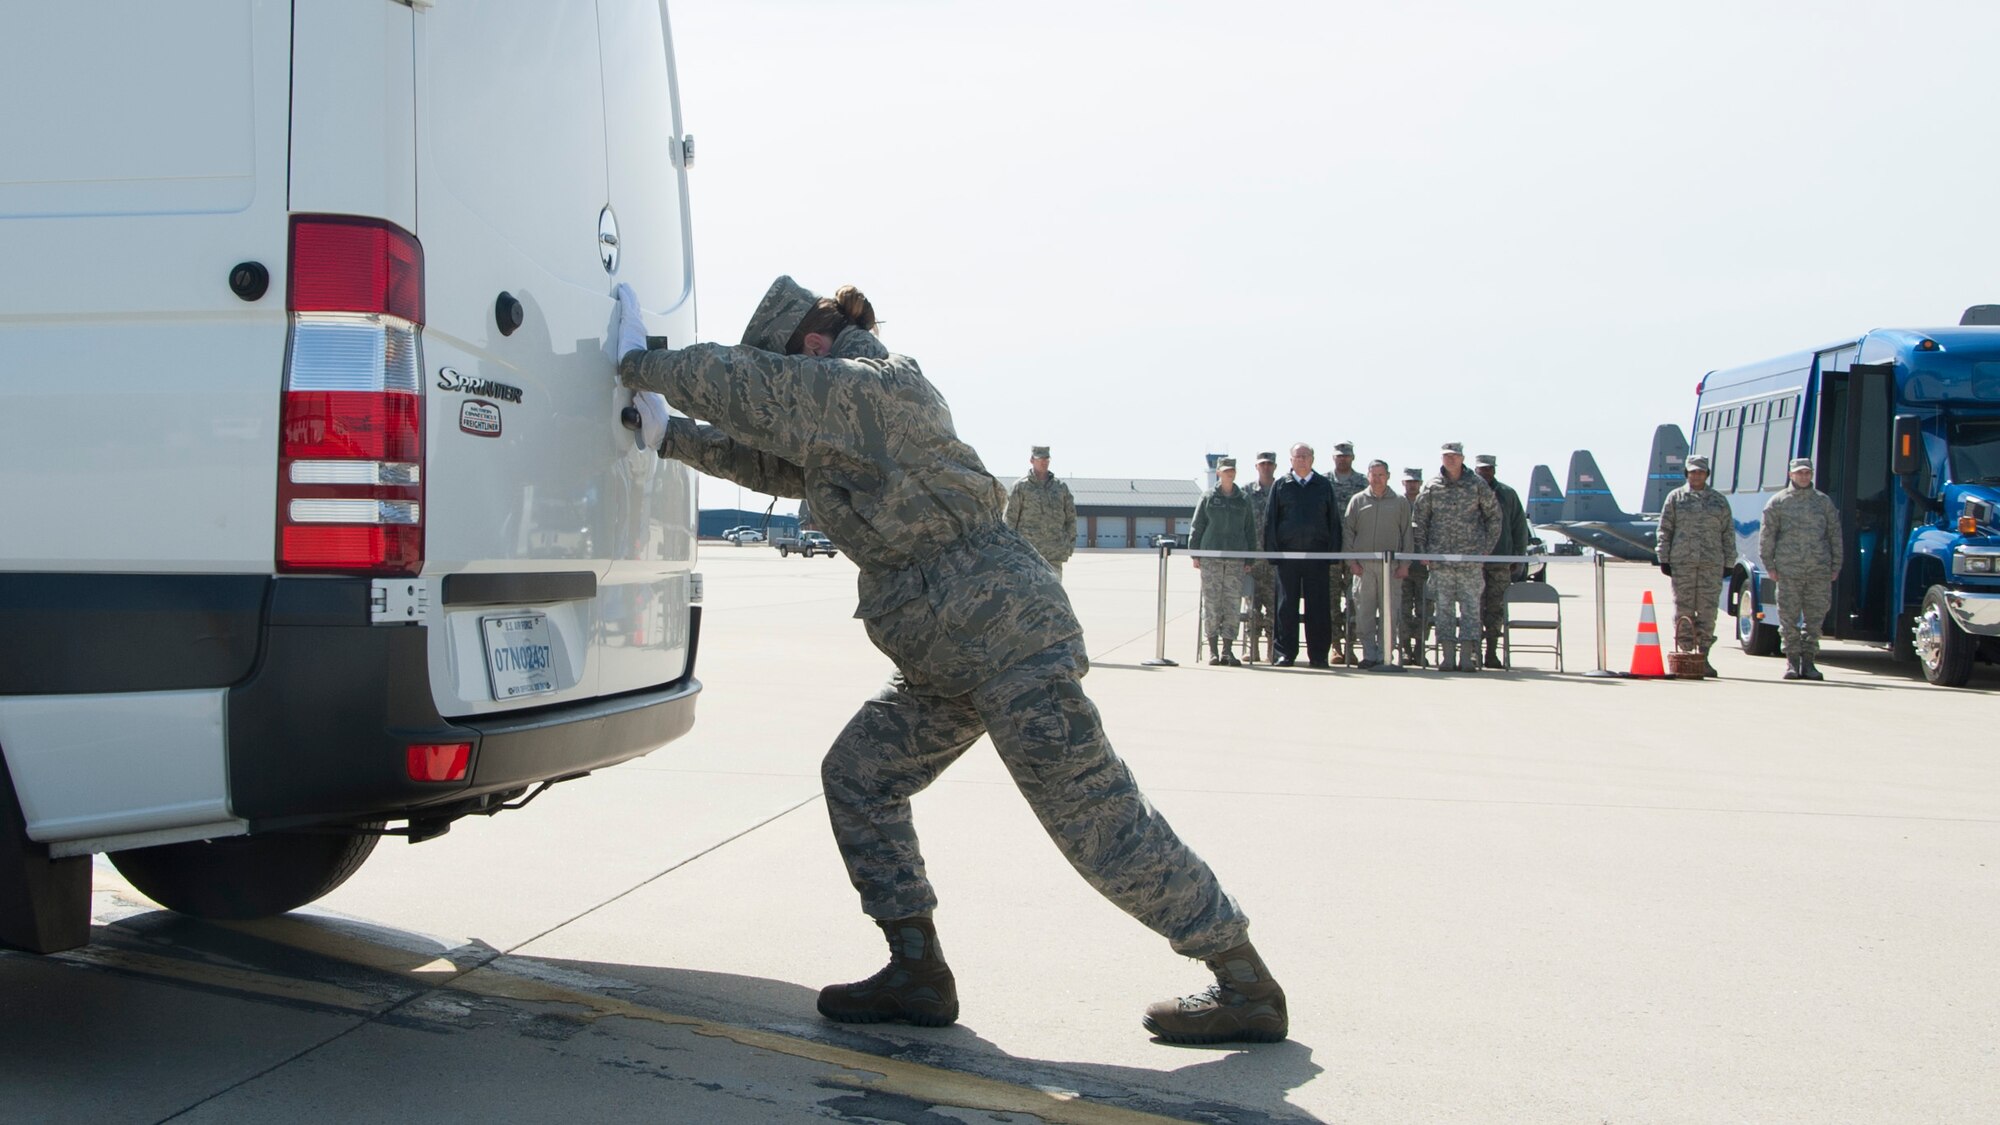 Senior Airman Jamie Debbrecht, a 512th Memorial Affairs Squadron services specialist, practices her role as door guard prior to the start of a dignified transfer divert exercise March 19, 2015, at New Castle Air National Guard Base, Del. Debbrecht is deployed to Air Force Mortuary Affairs Operations from the 512th Memorial Affairs Squadron, Dover Air Force Base, Del. (U.S. Air Force photo/Senior Airman Jared Duhon)